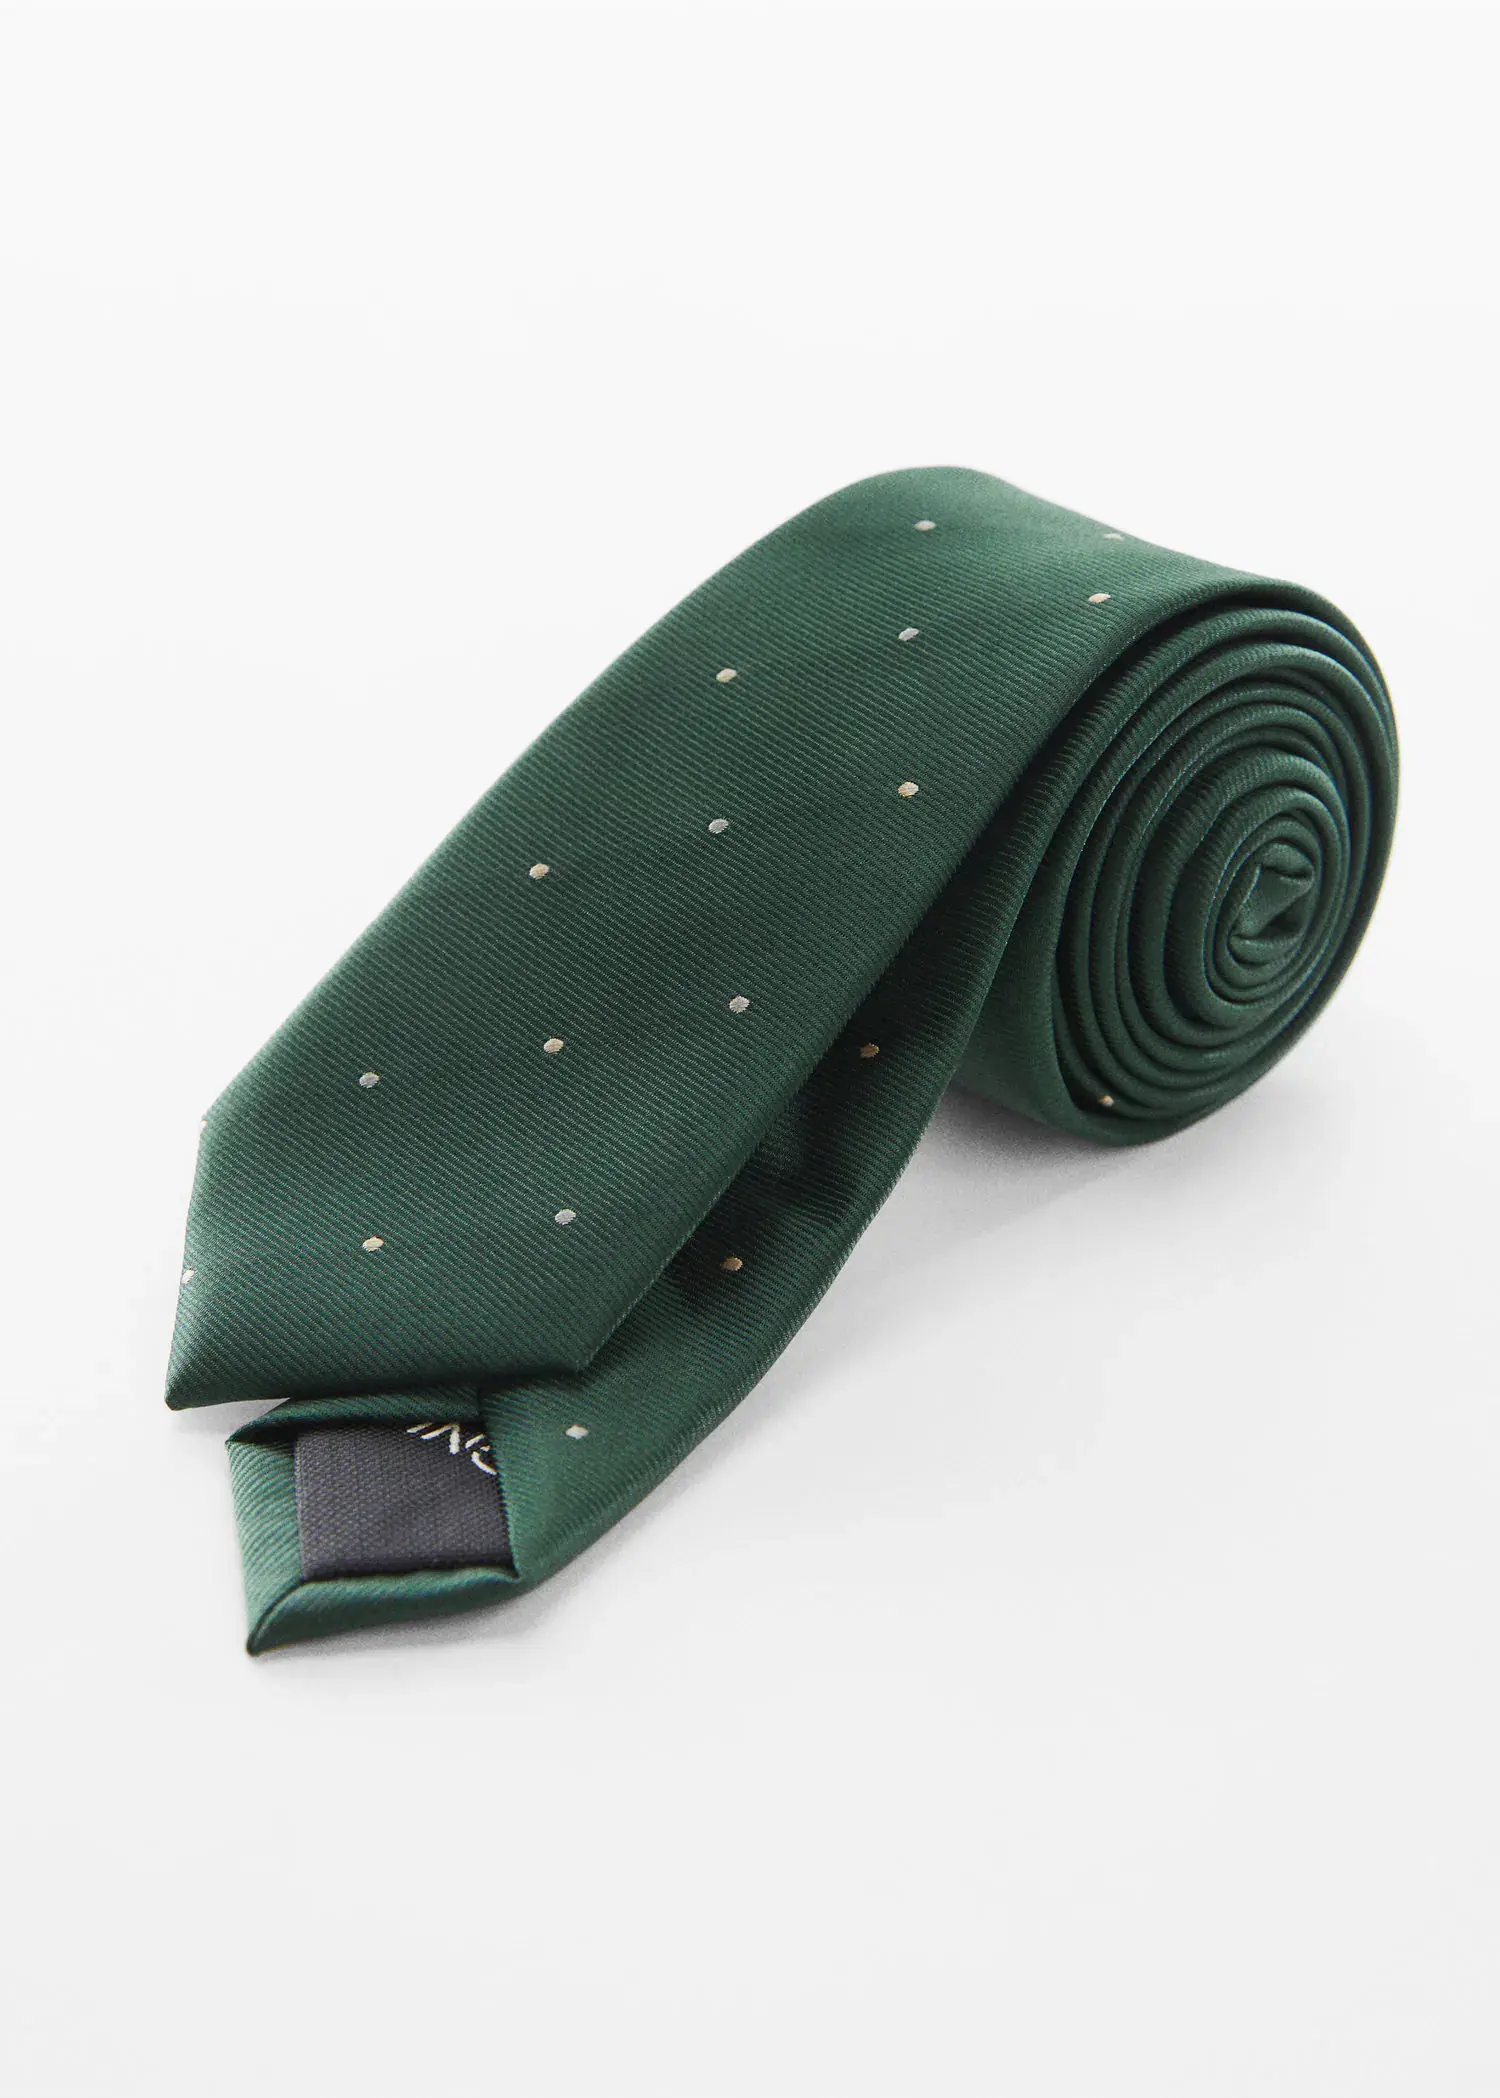 Mango Tie with micro polka-dot structure. a green neck tie with white polka dots. 